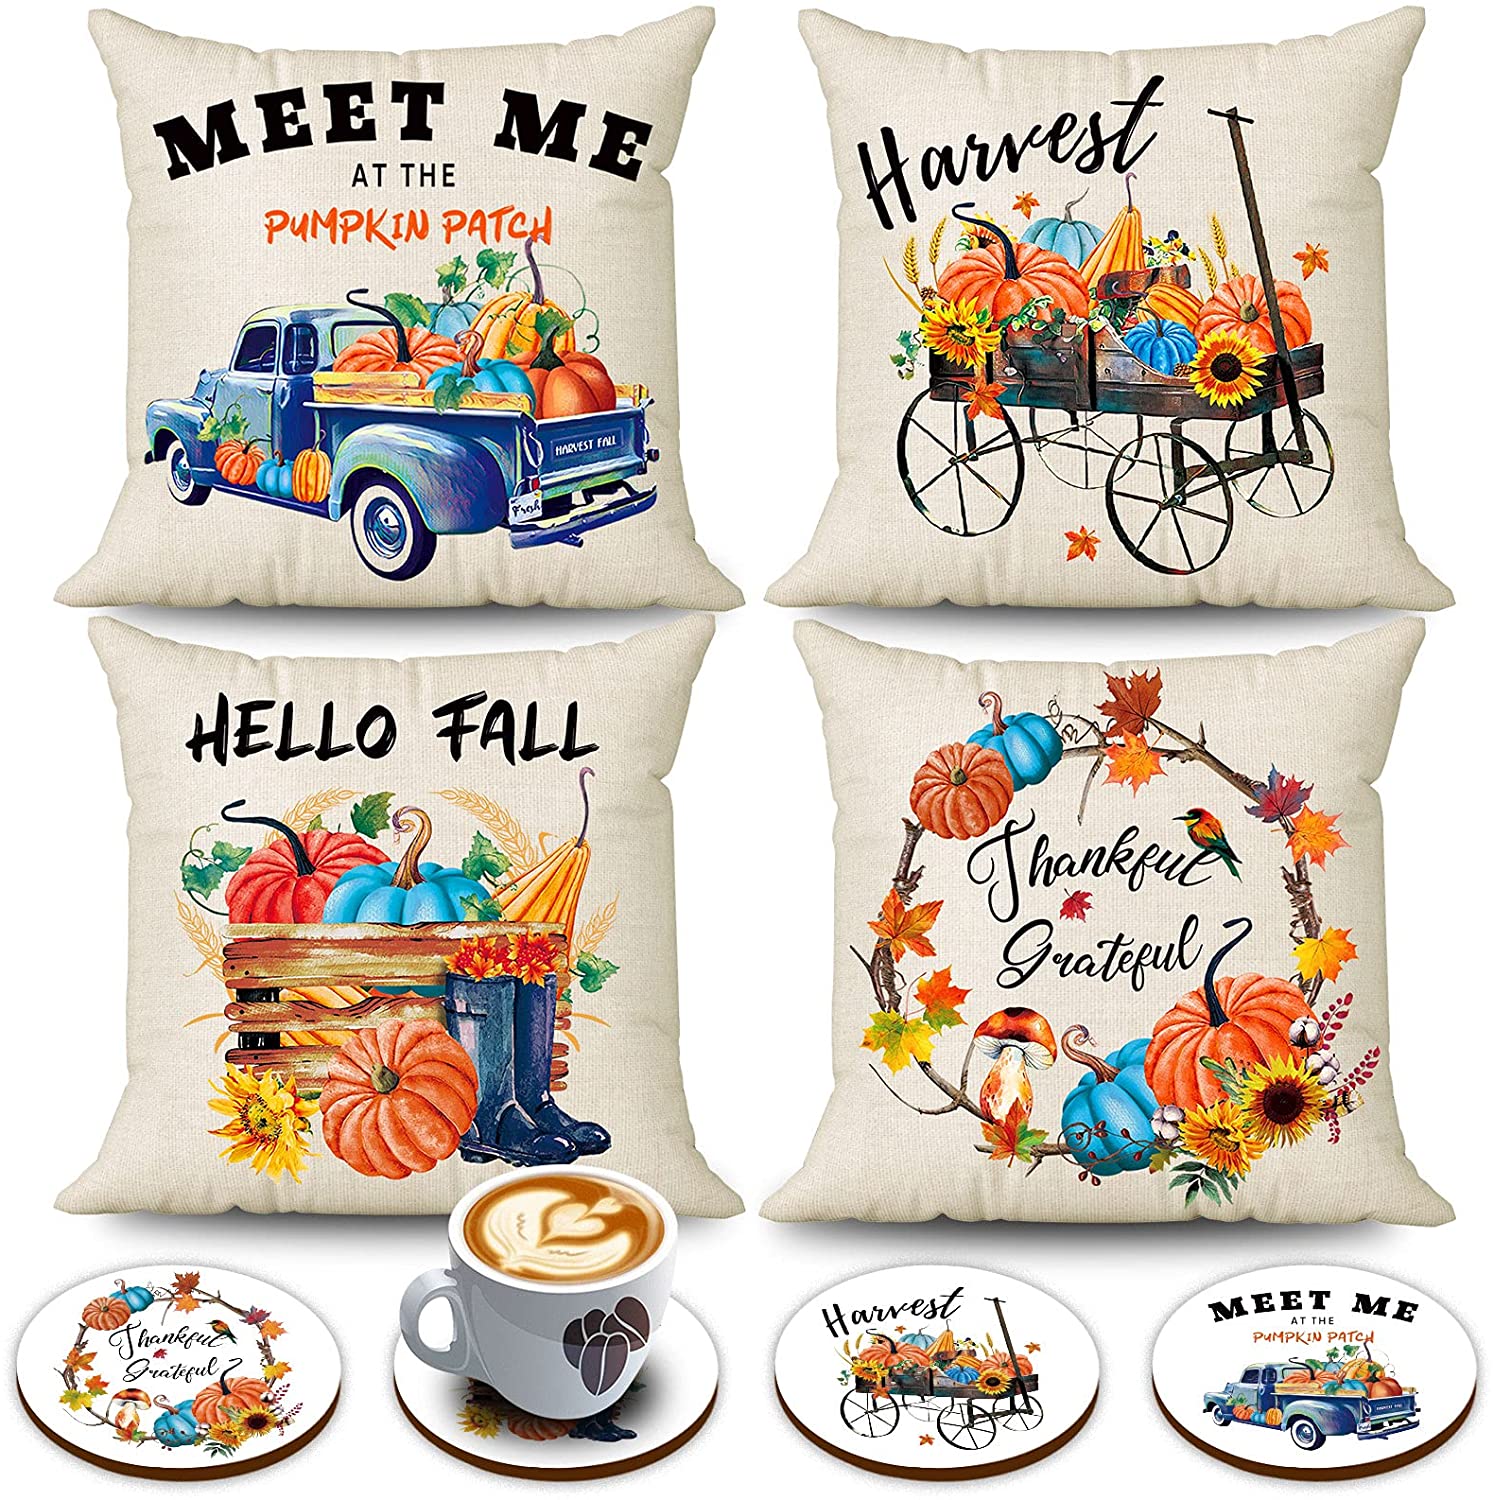 Set of 4 Hello Fall Pillow Covers 18 x 18 with 4 Bonus Coasters (Wreath, Truck)